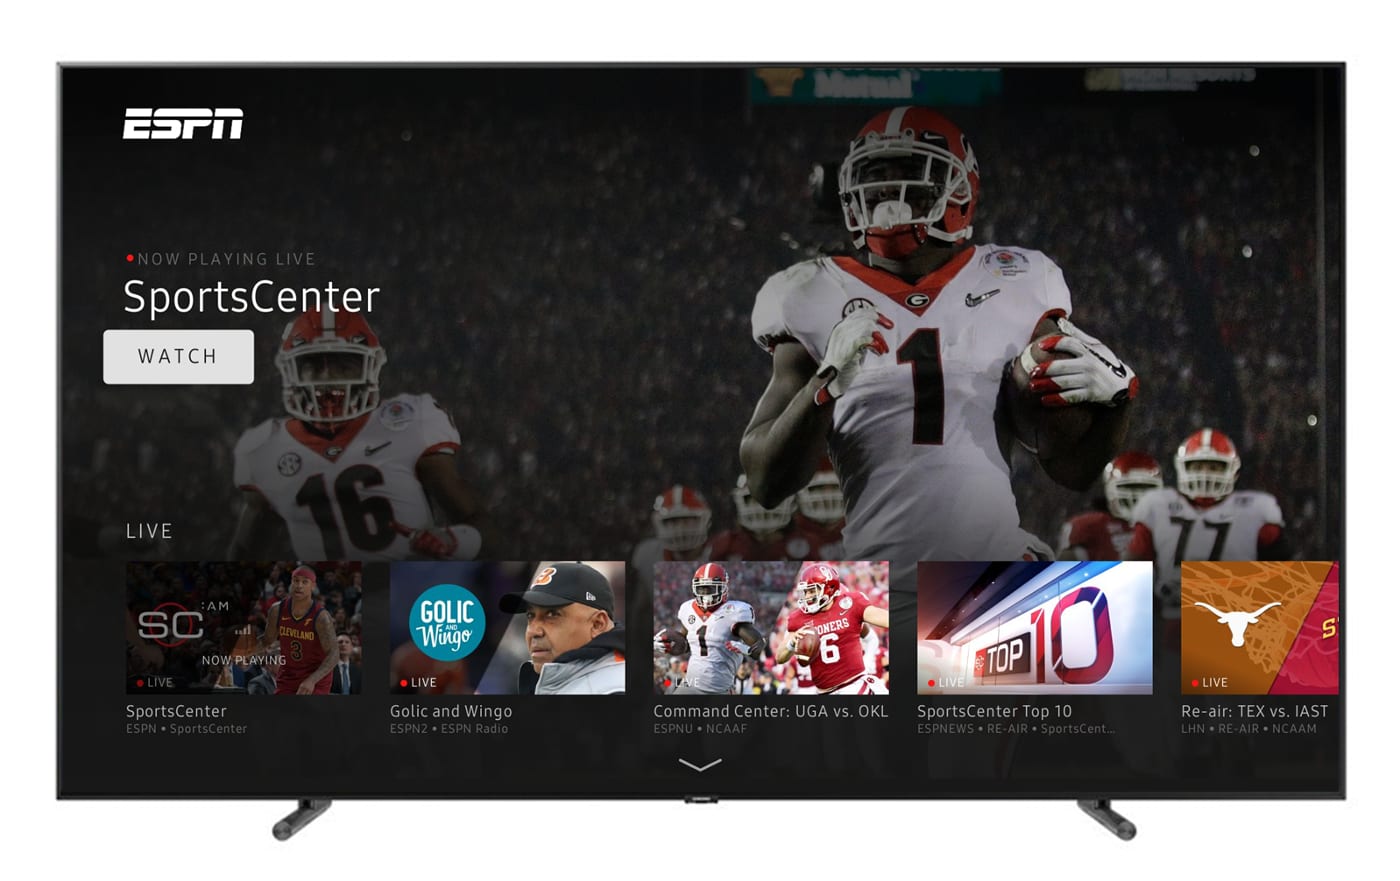 Samsung's smart TVs are getting ESPN and Freeform